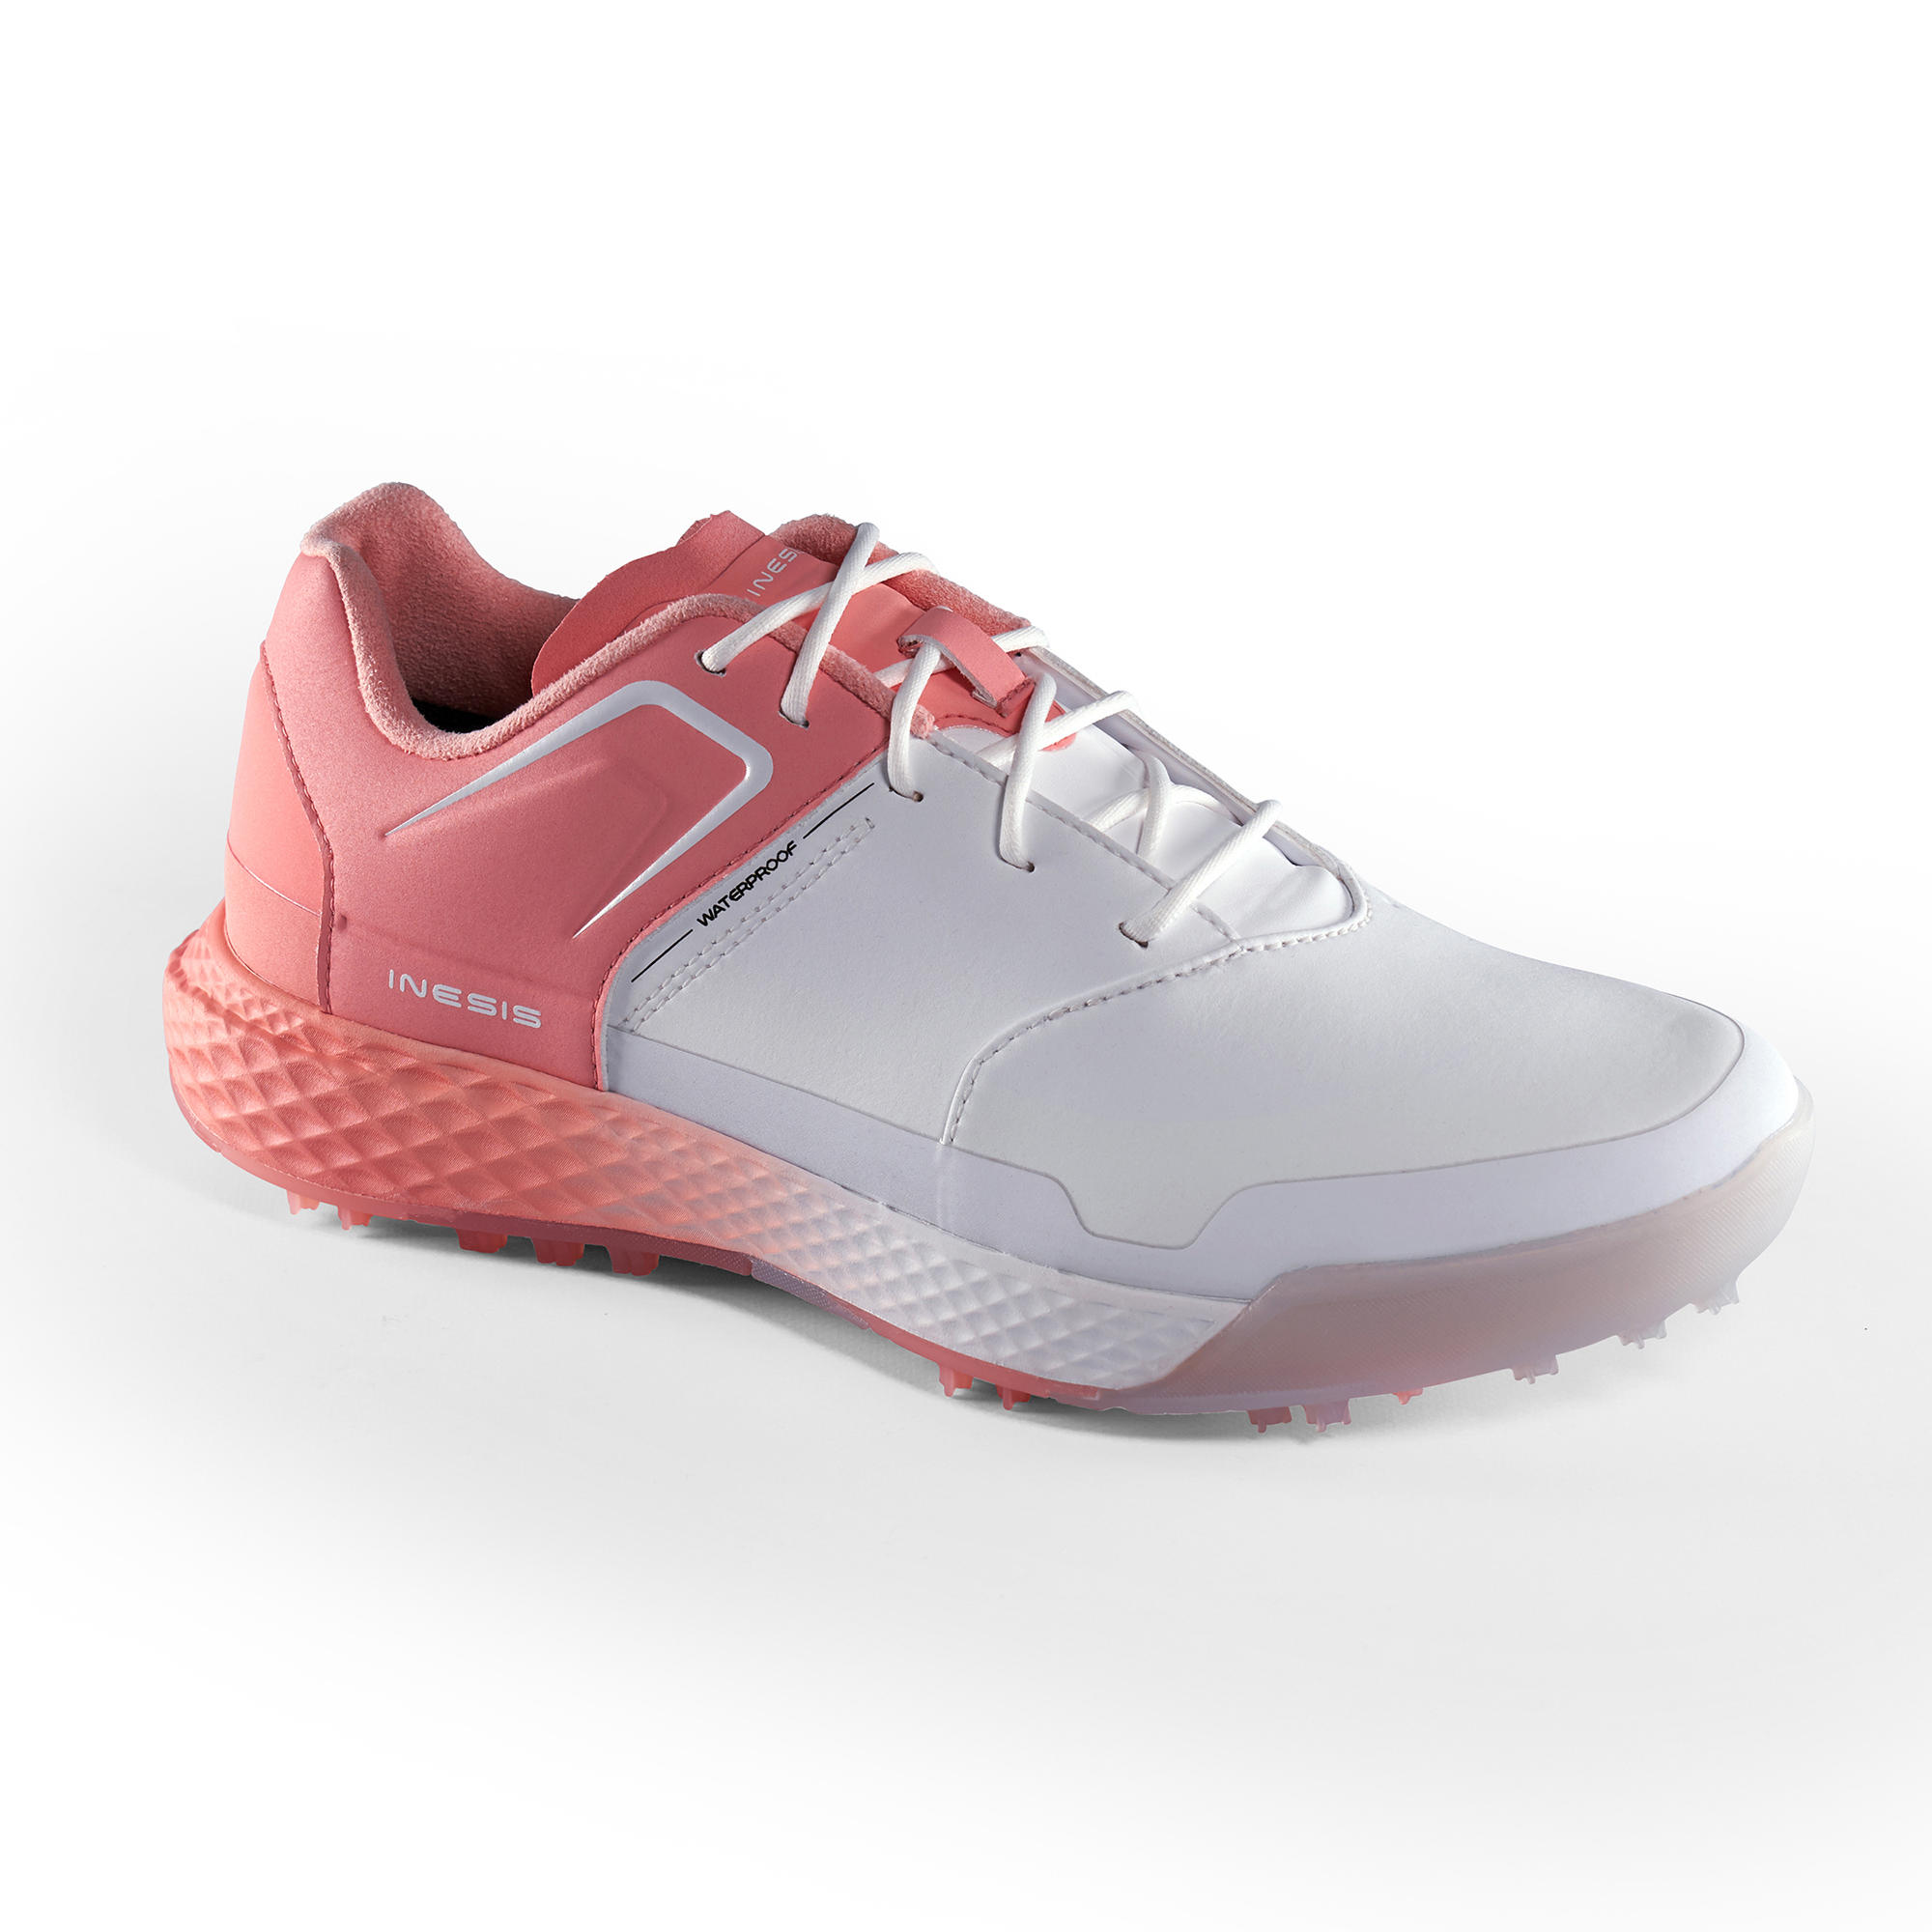 LADIES GRIP WATERPROOF GOLF SHOES WHITE AND PINK 1/13